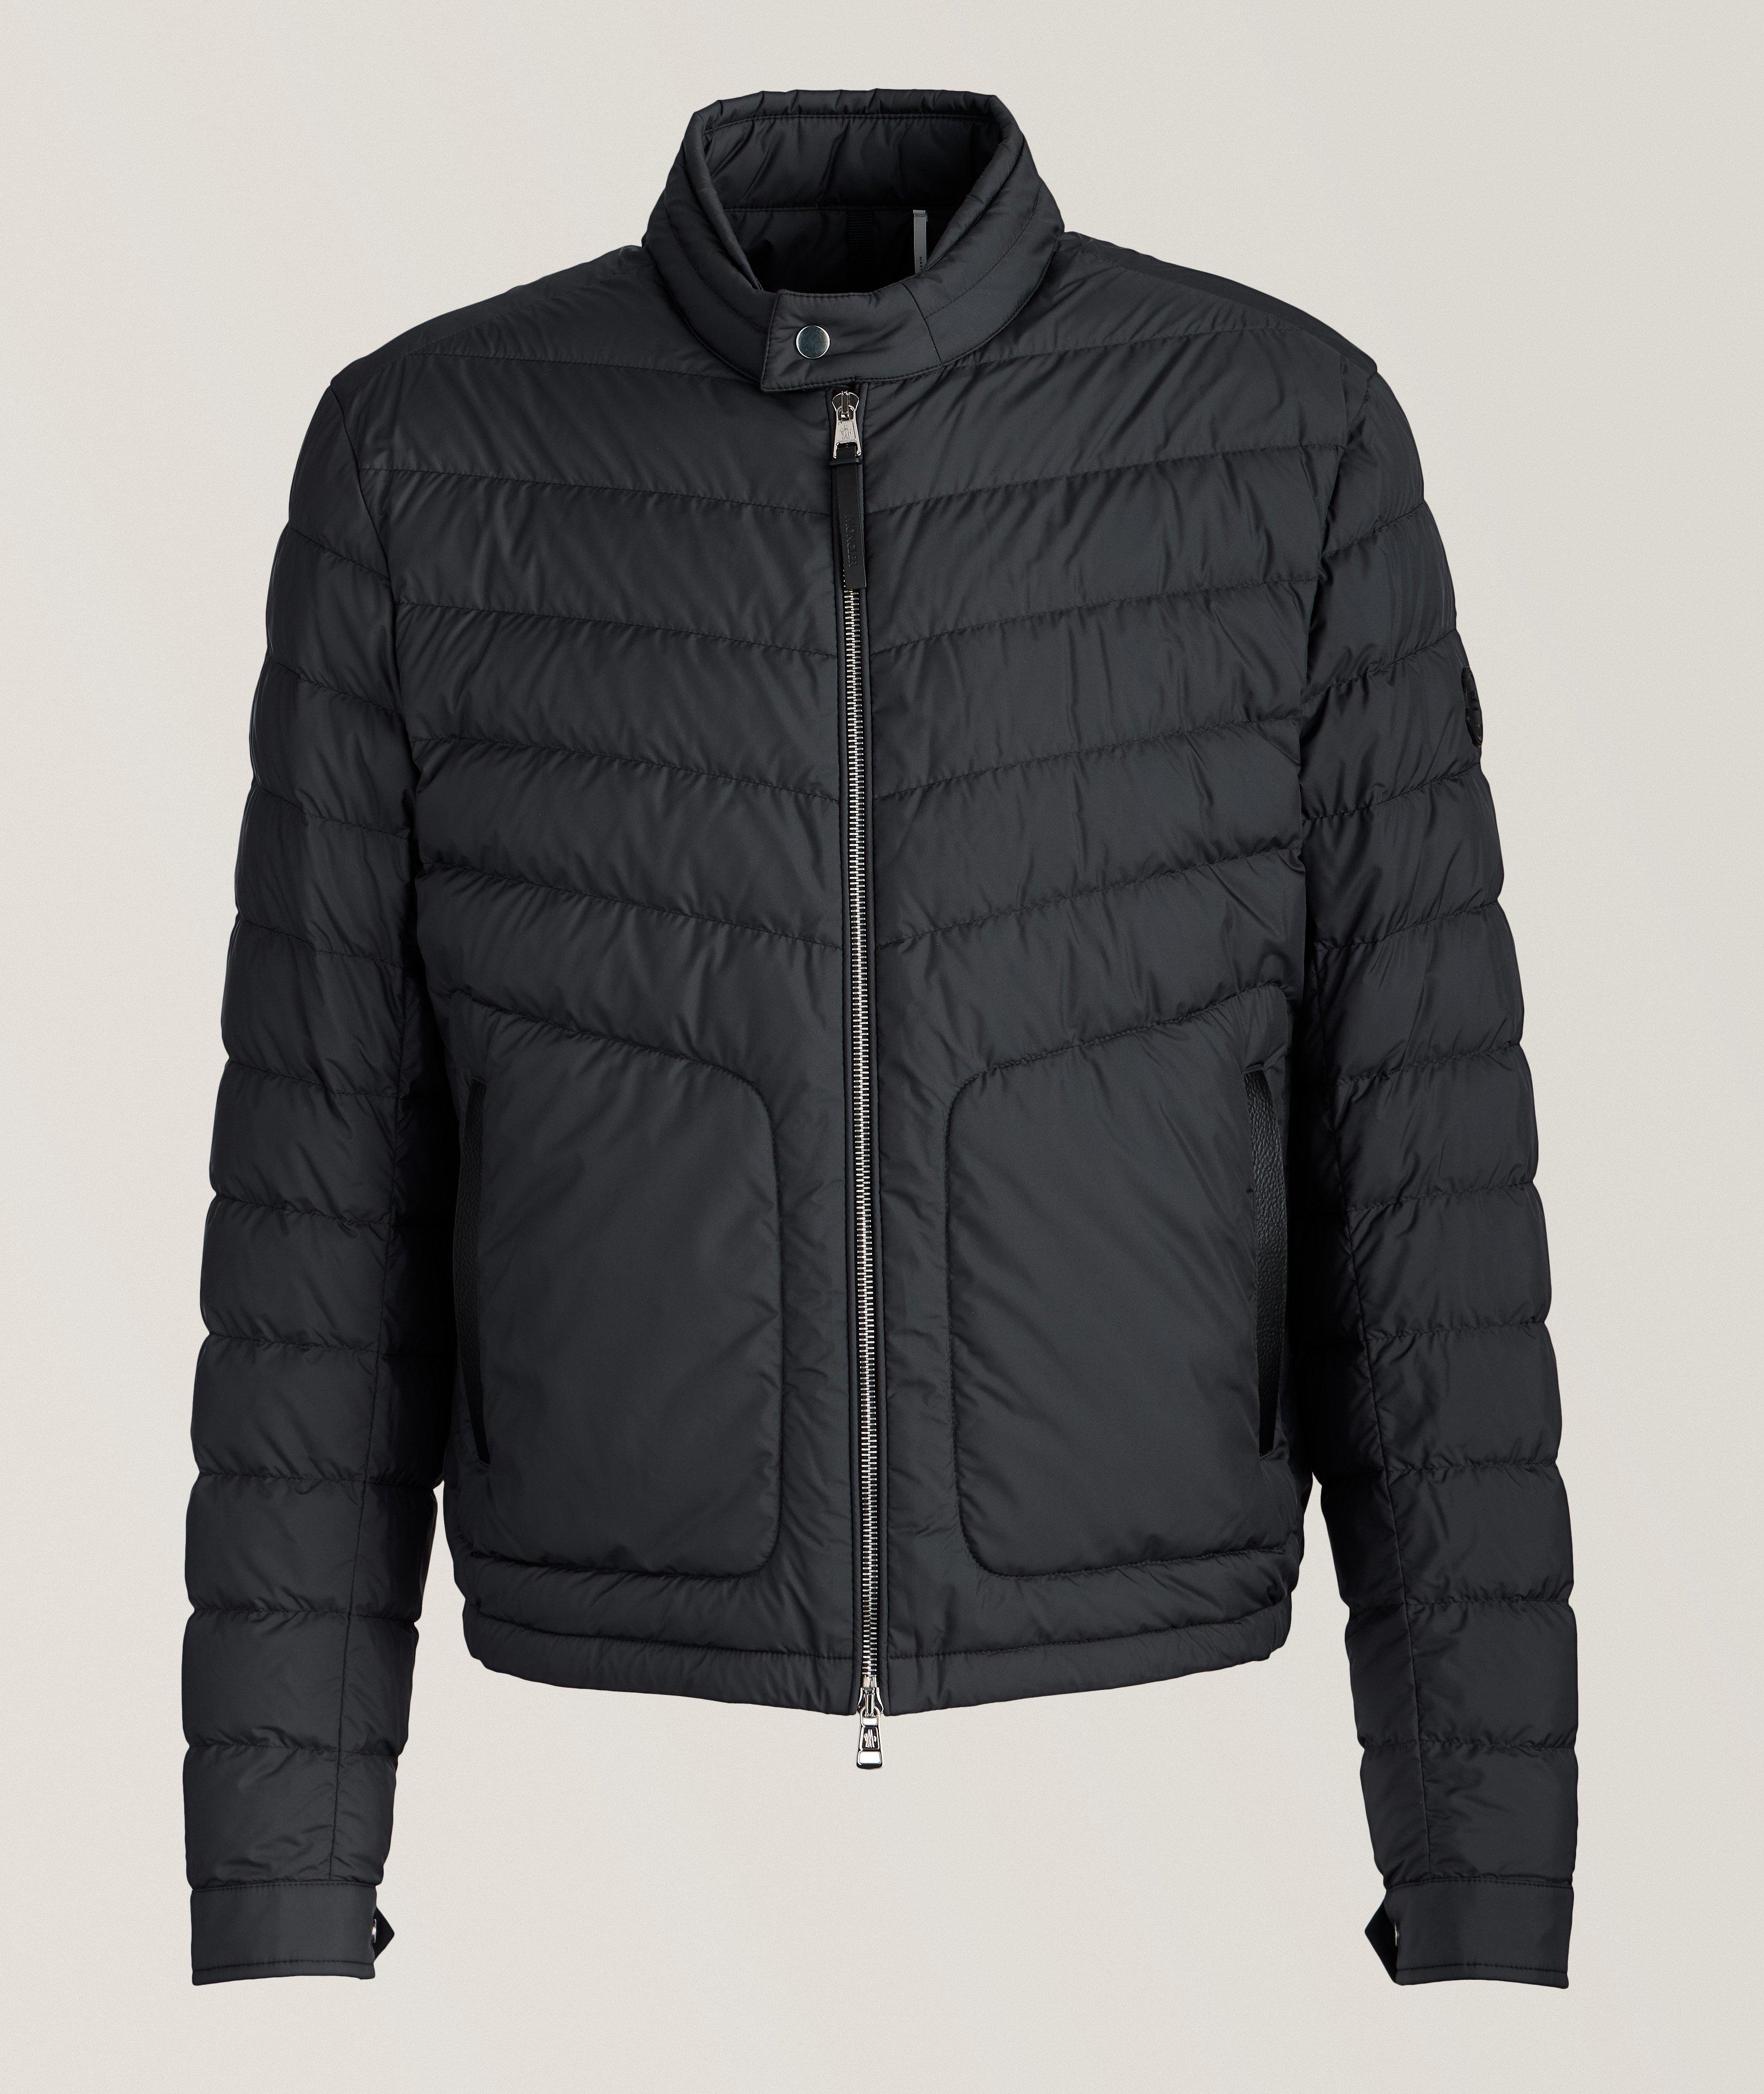 Maurienne Quilted Jacket image 0